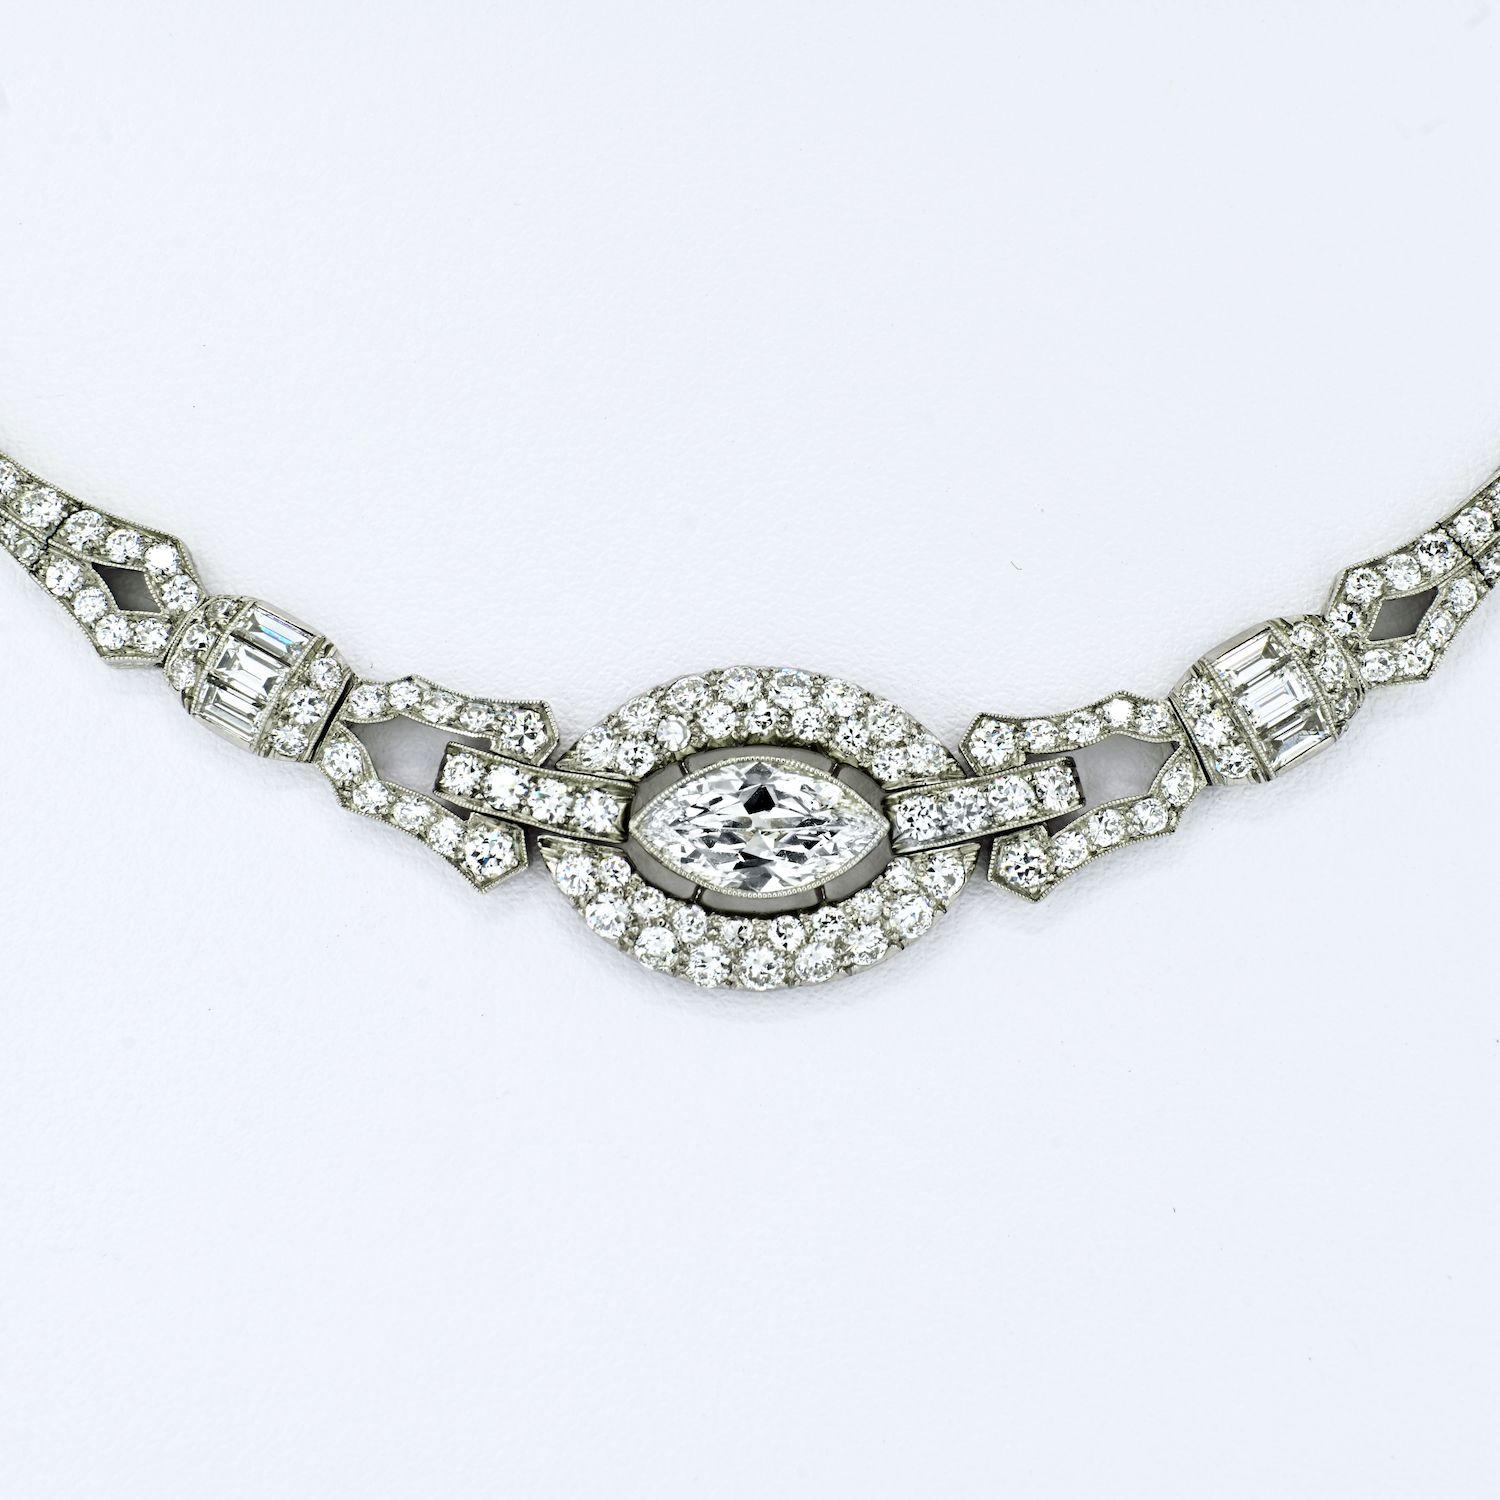 Delicate diamond necklace by Oscar Heyman. Crafted in the Art Deco era, and fits like a choker. Perfect as a wedding necklace that is subtle yet timeless. 
A floating marquise-cut diamond within a transitional-cut diamond frame, joins openwork